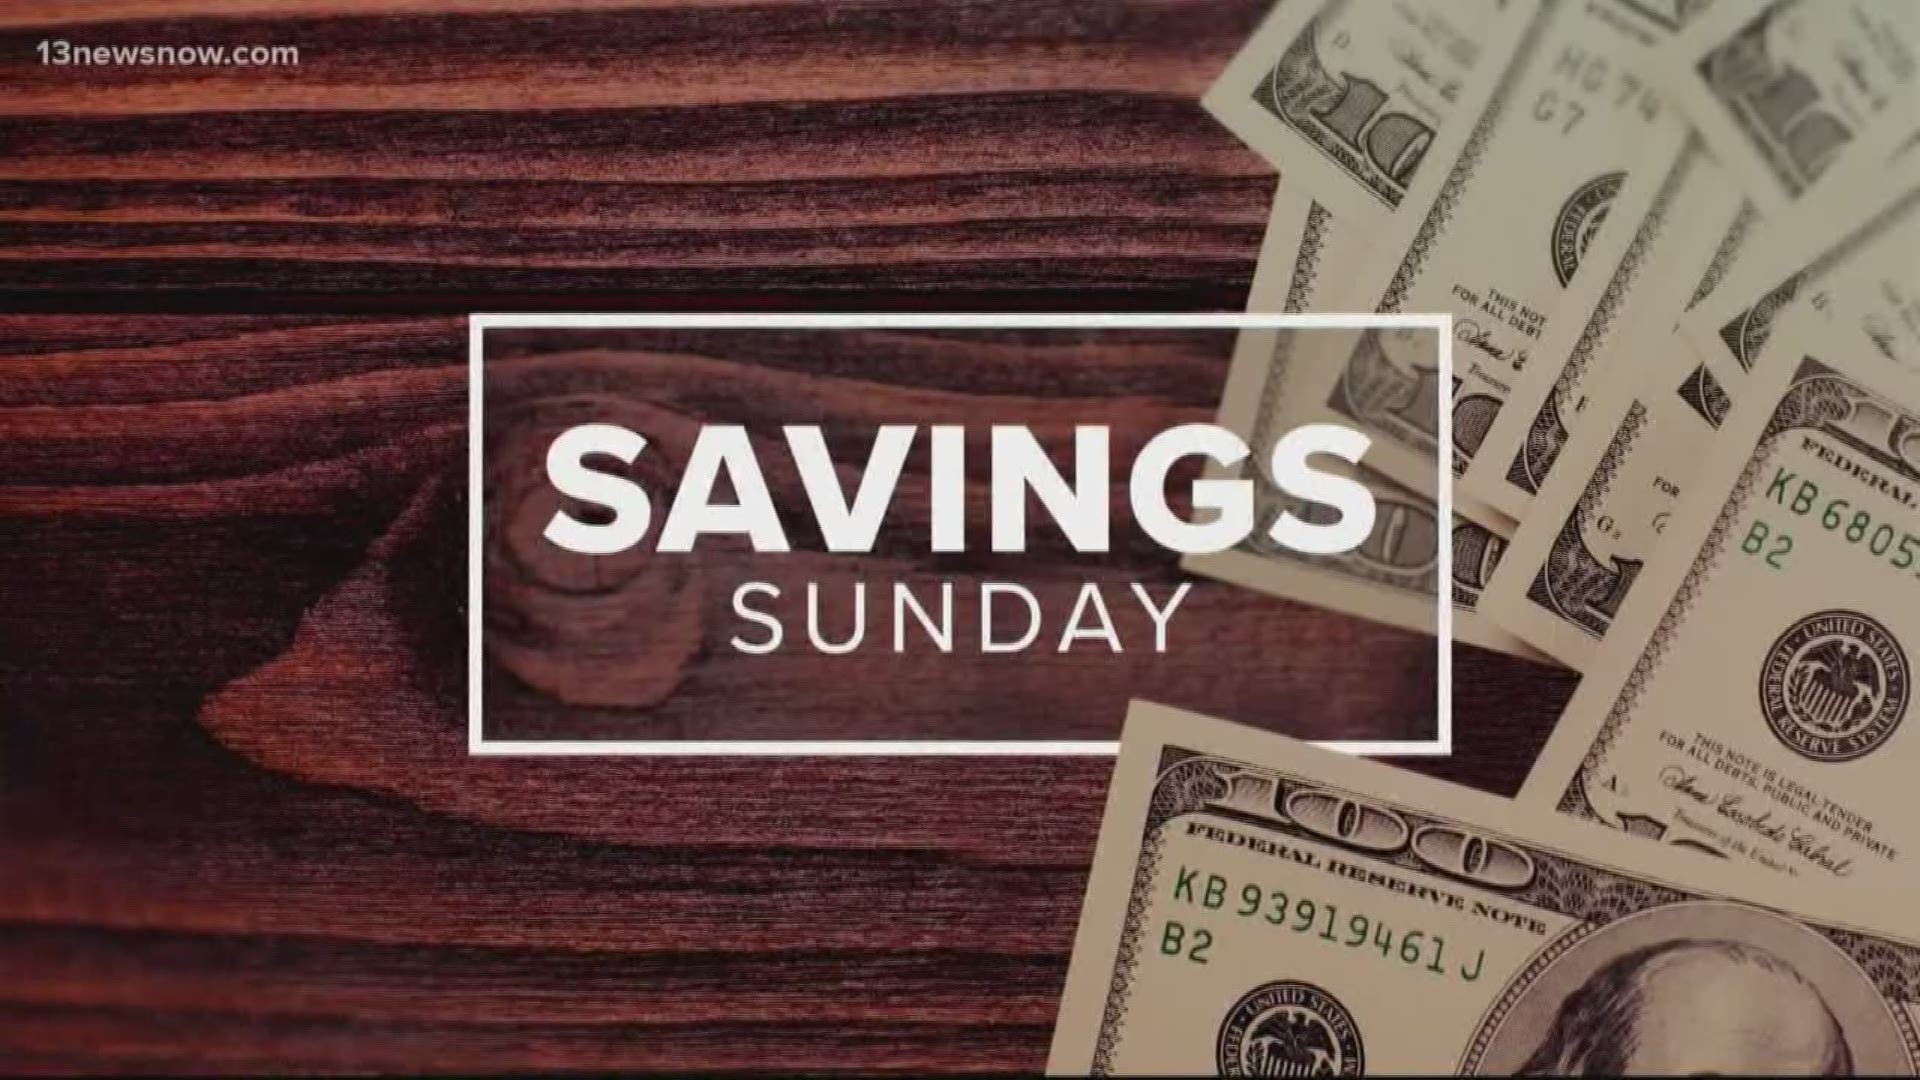 Savings Sunday deals of the Week for Sept. 1, 2019 ...